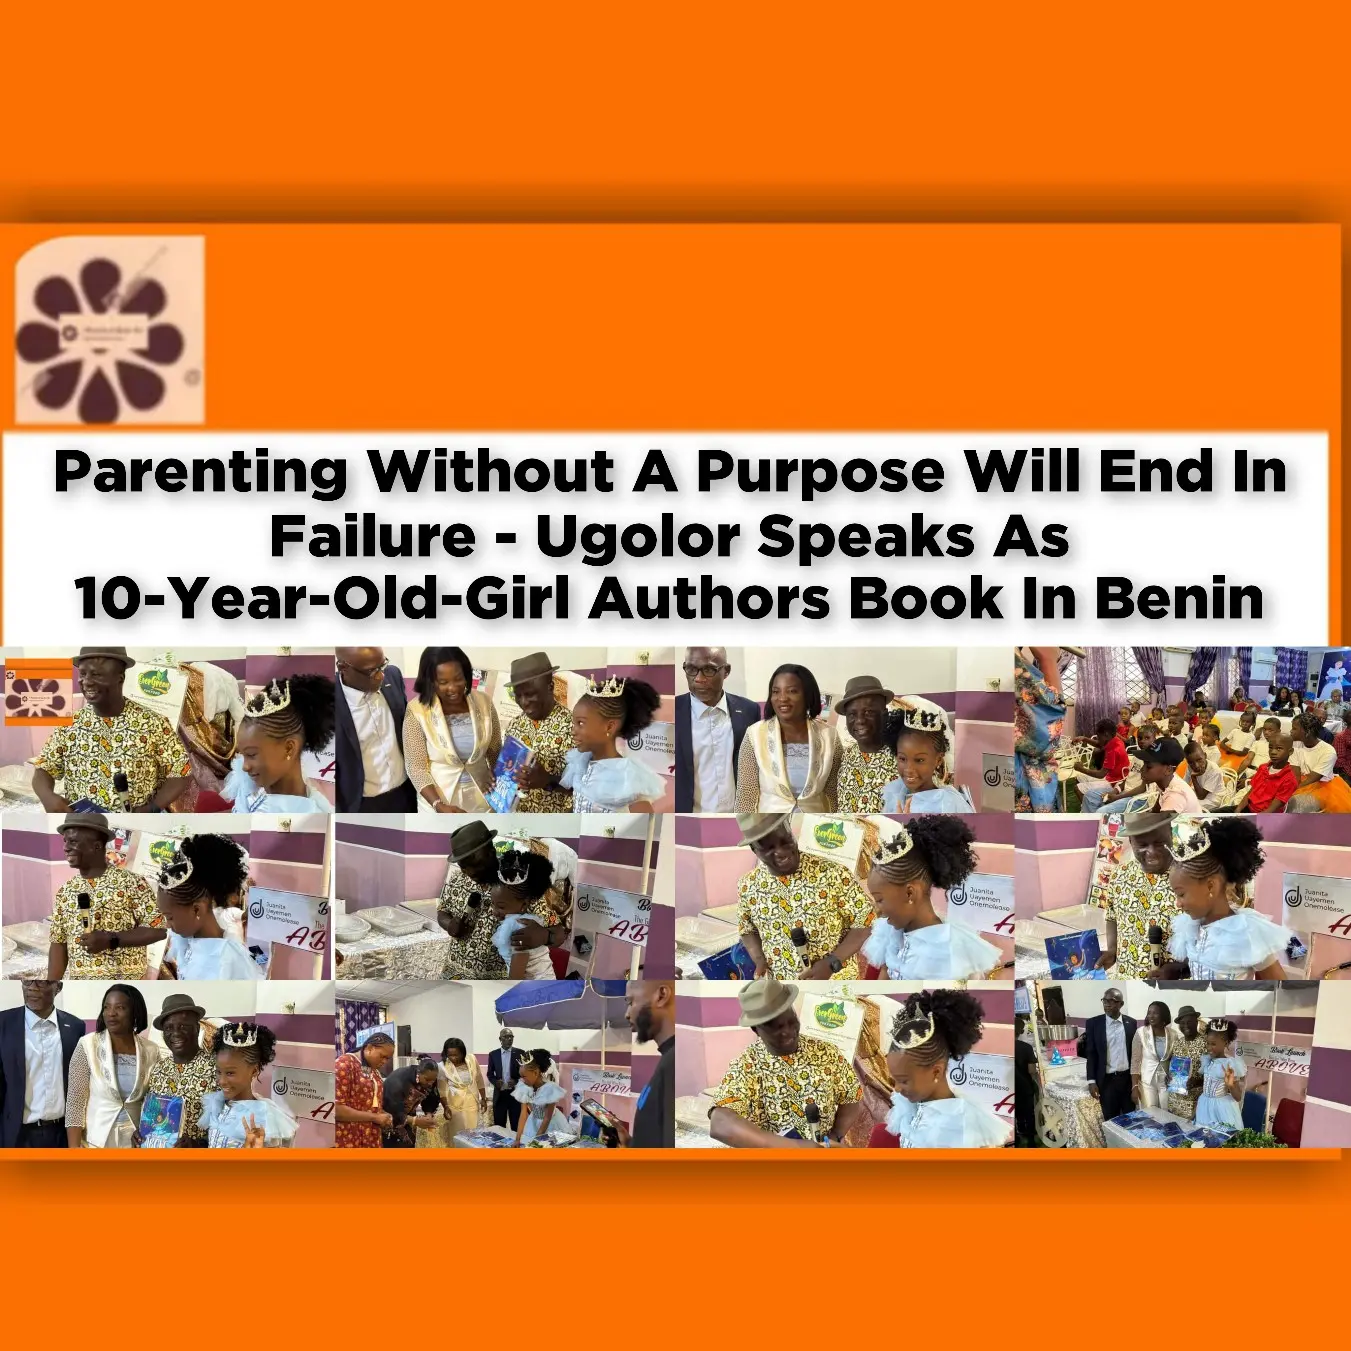 Parenting Without A Purpose Will End In Failure - Ugolor Speaks As 10-Year-Old-Girl Authors Book In Benin ~ OsazuwaAkonedo #Umahi